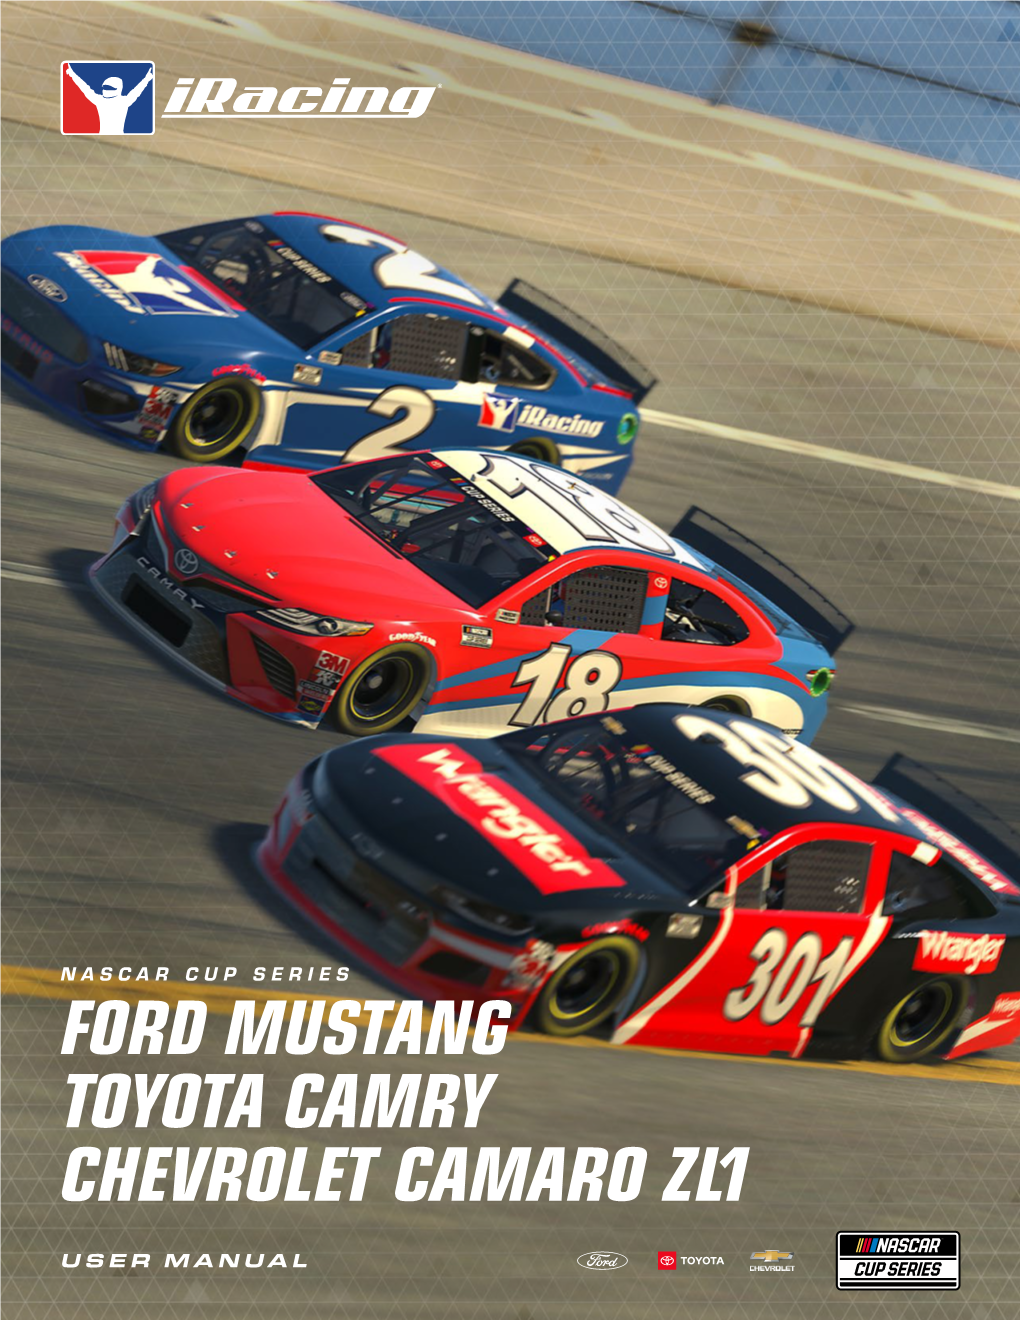 Ford Mustang Toyota Camry Chevrolet Camaro Zl1